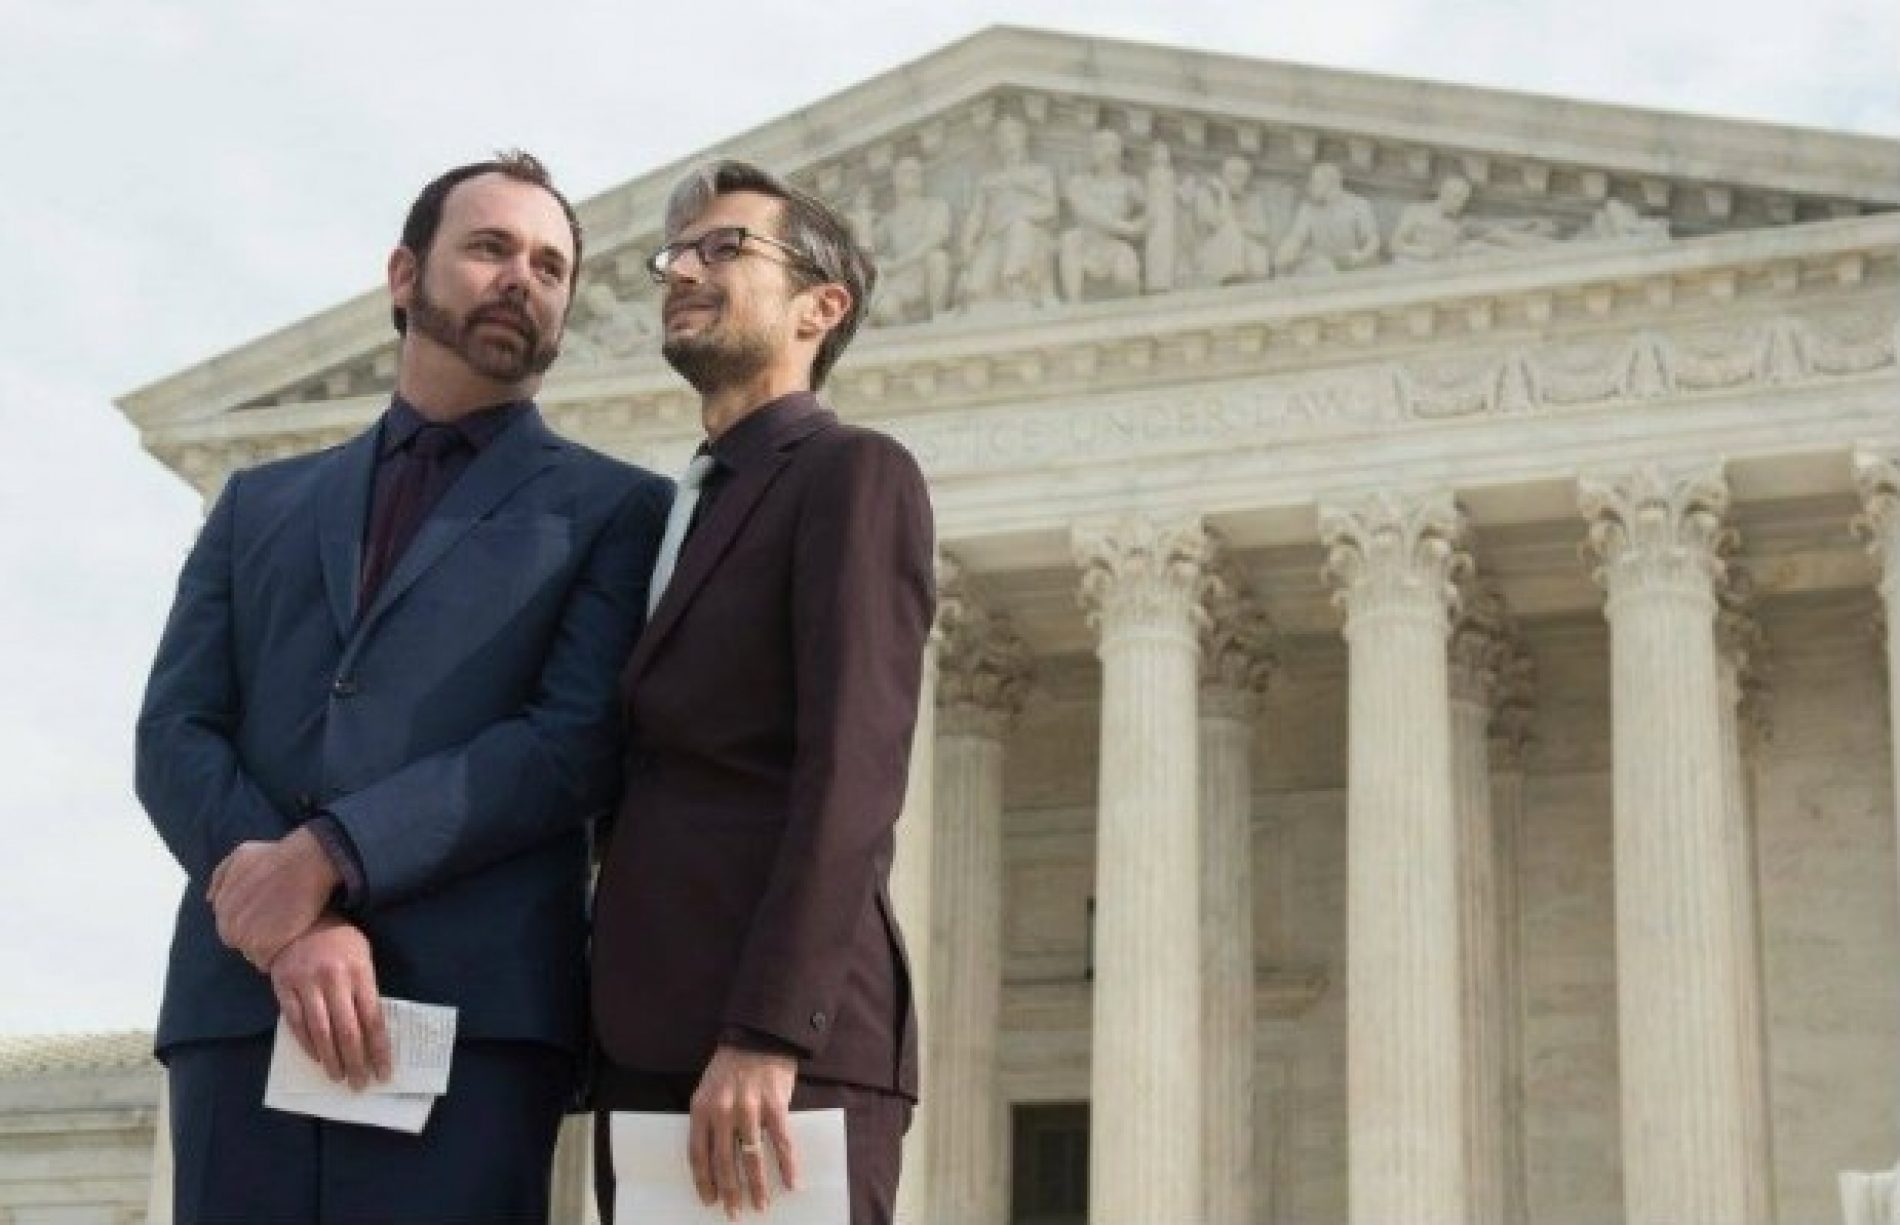 US Supreme Court rules in favor of baker who refused to make gay wedding cake, Americans react to the ruling